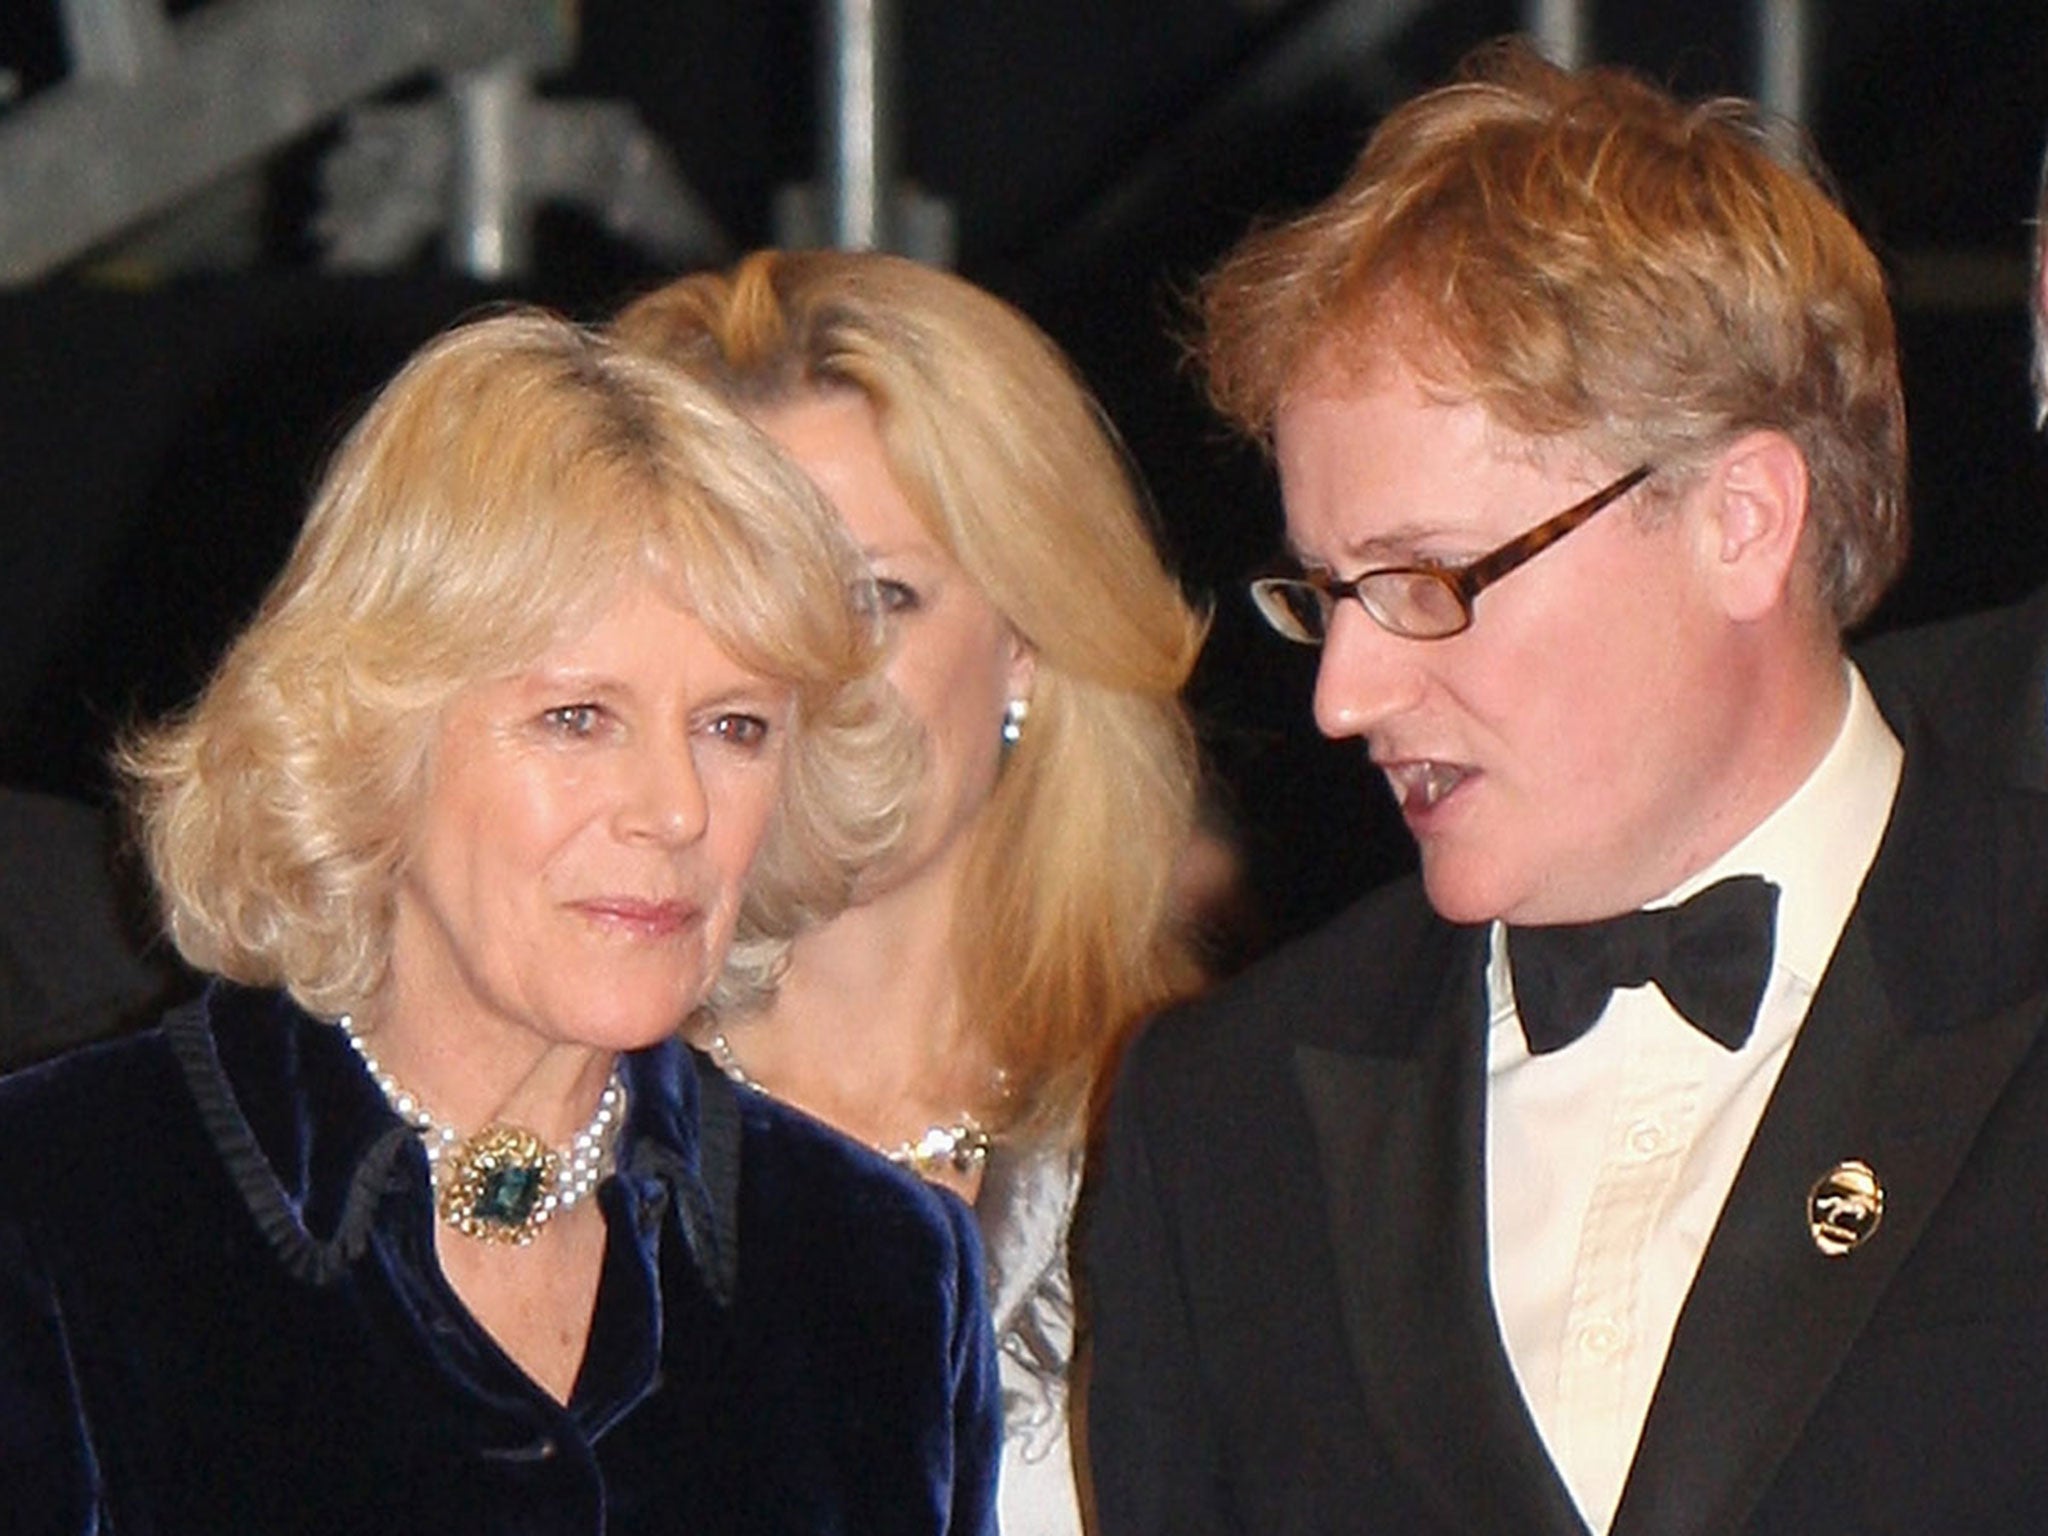 Camilla, Duchess of Cornwall, with event organiser Simon Brooks-Ward in 2008